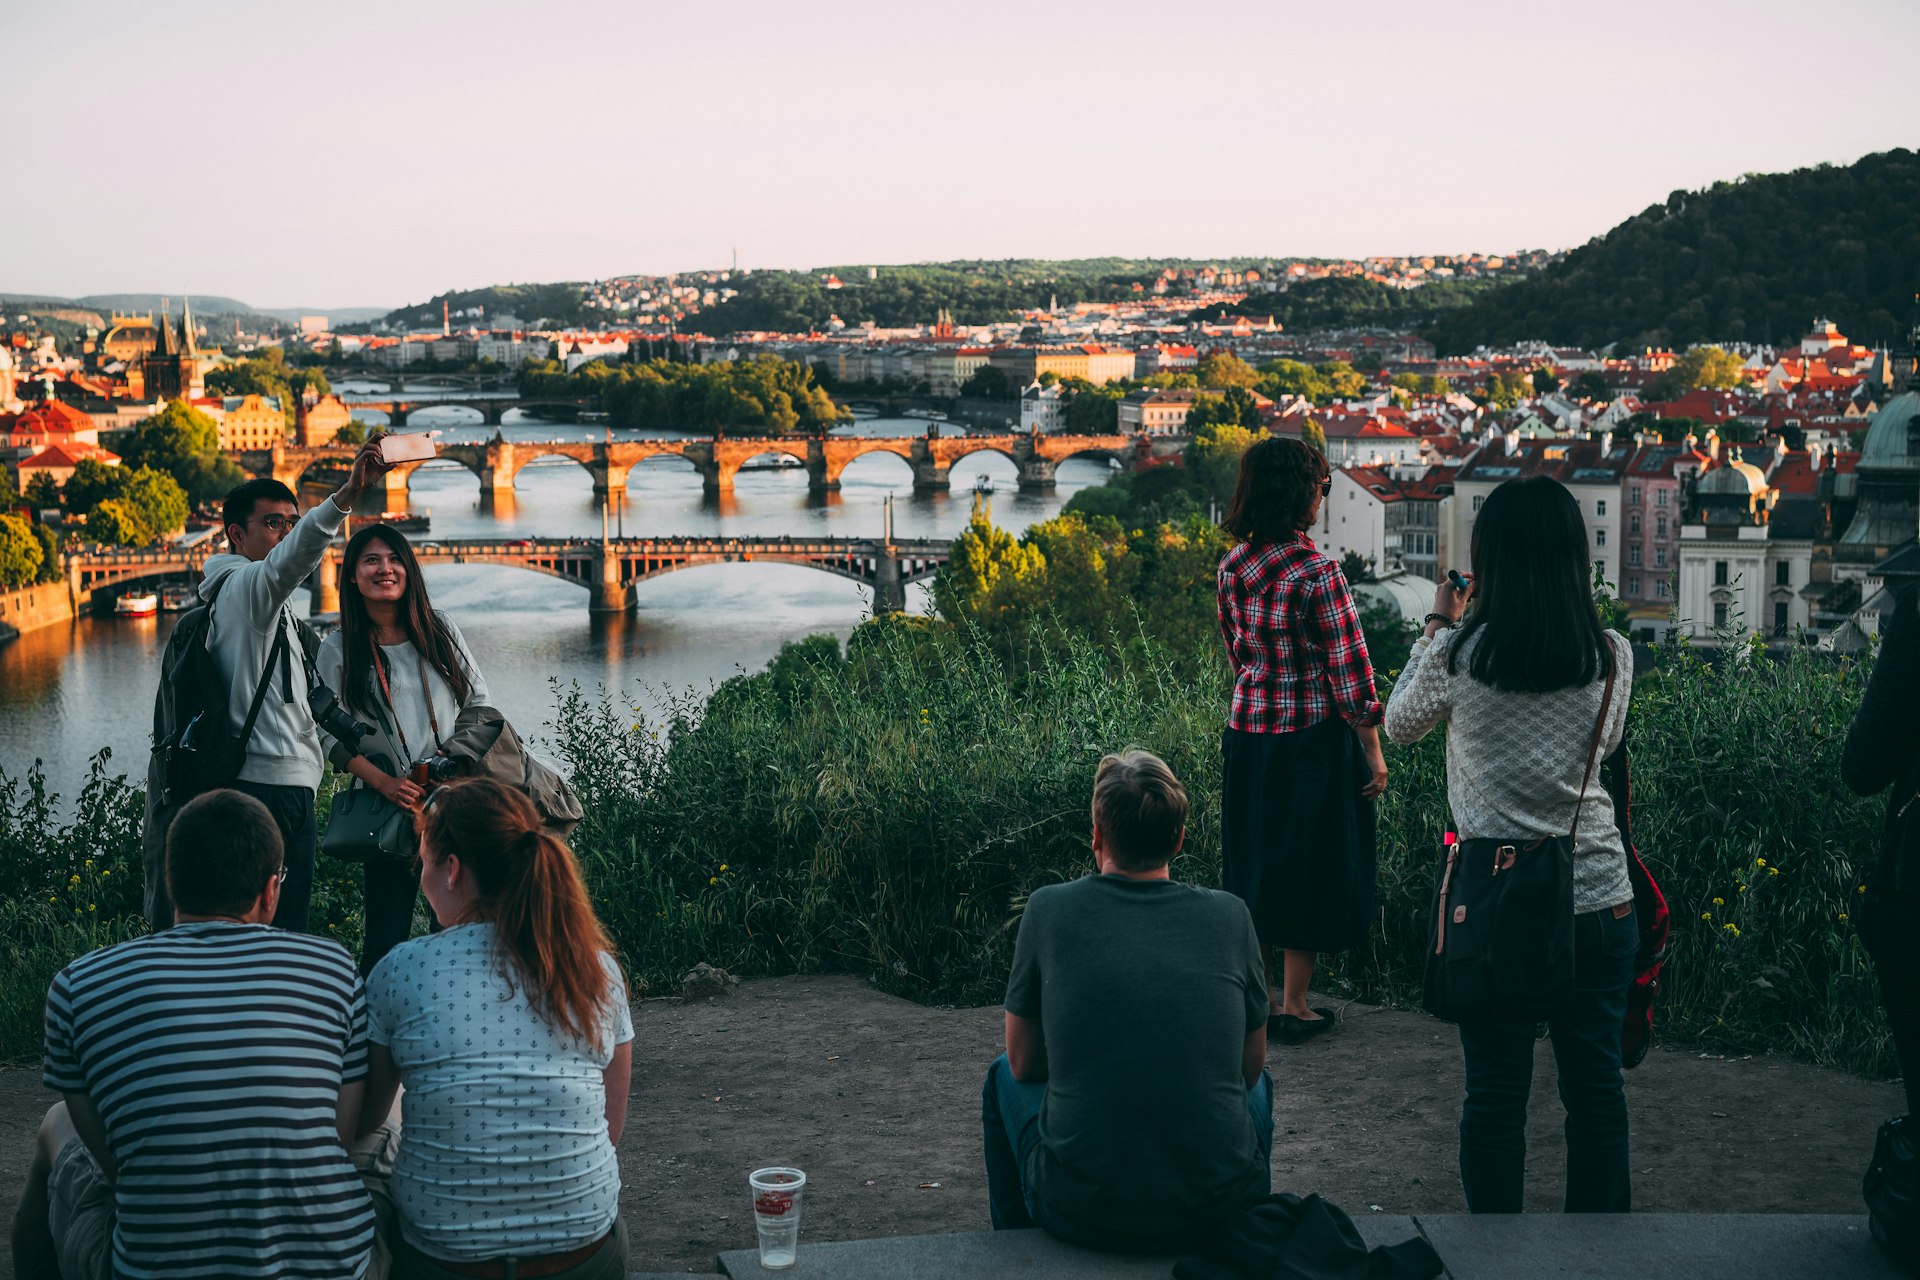 People enjoying the sunset over a city with a river running through the center of it